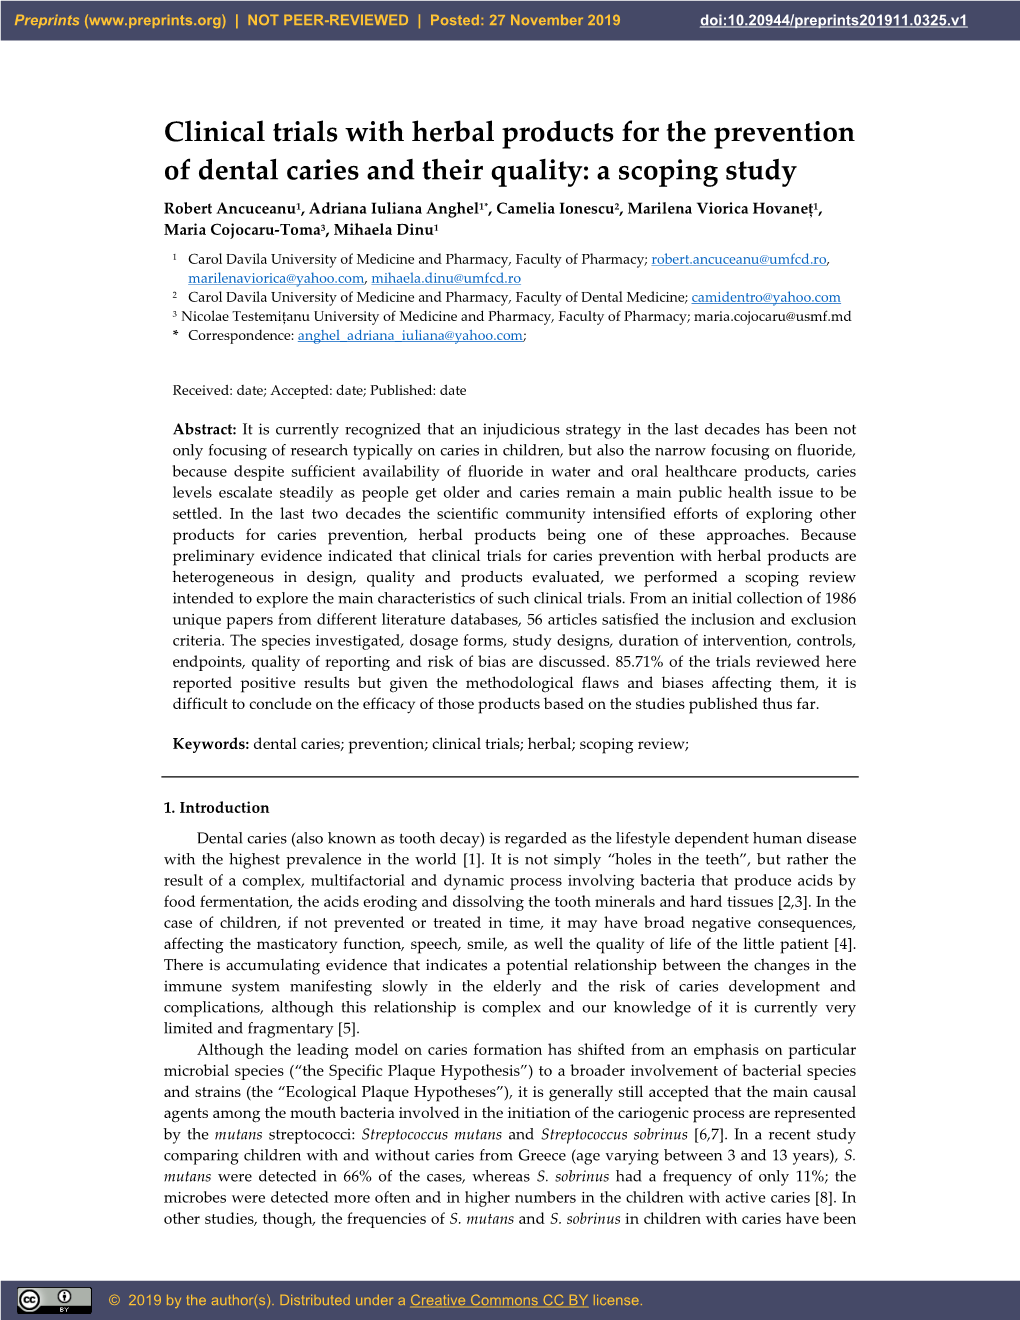 Clinical Trials with Herbal Products for the Prevention of Dental Caries and Their Quality: a Scoping Study